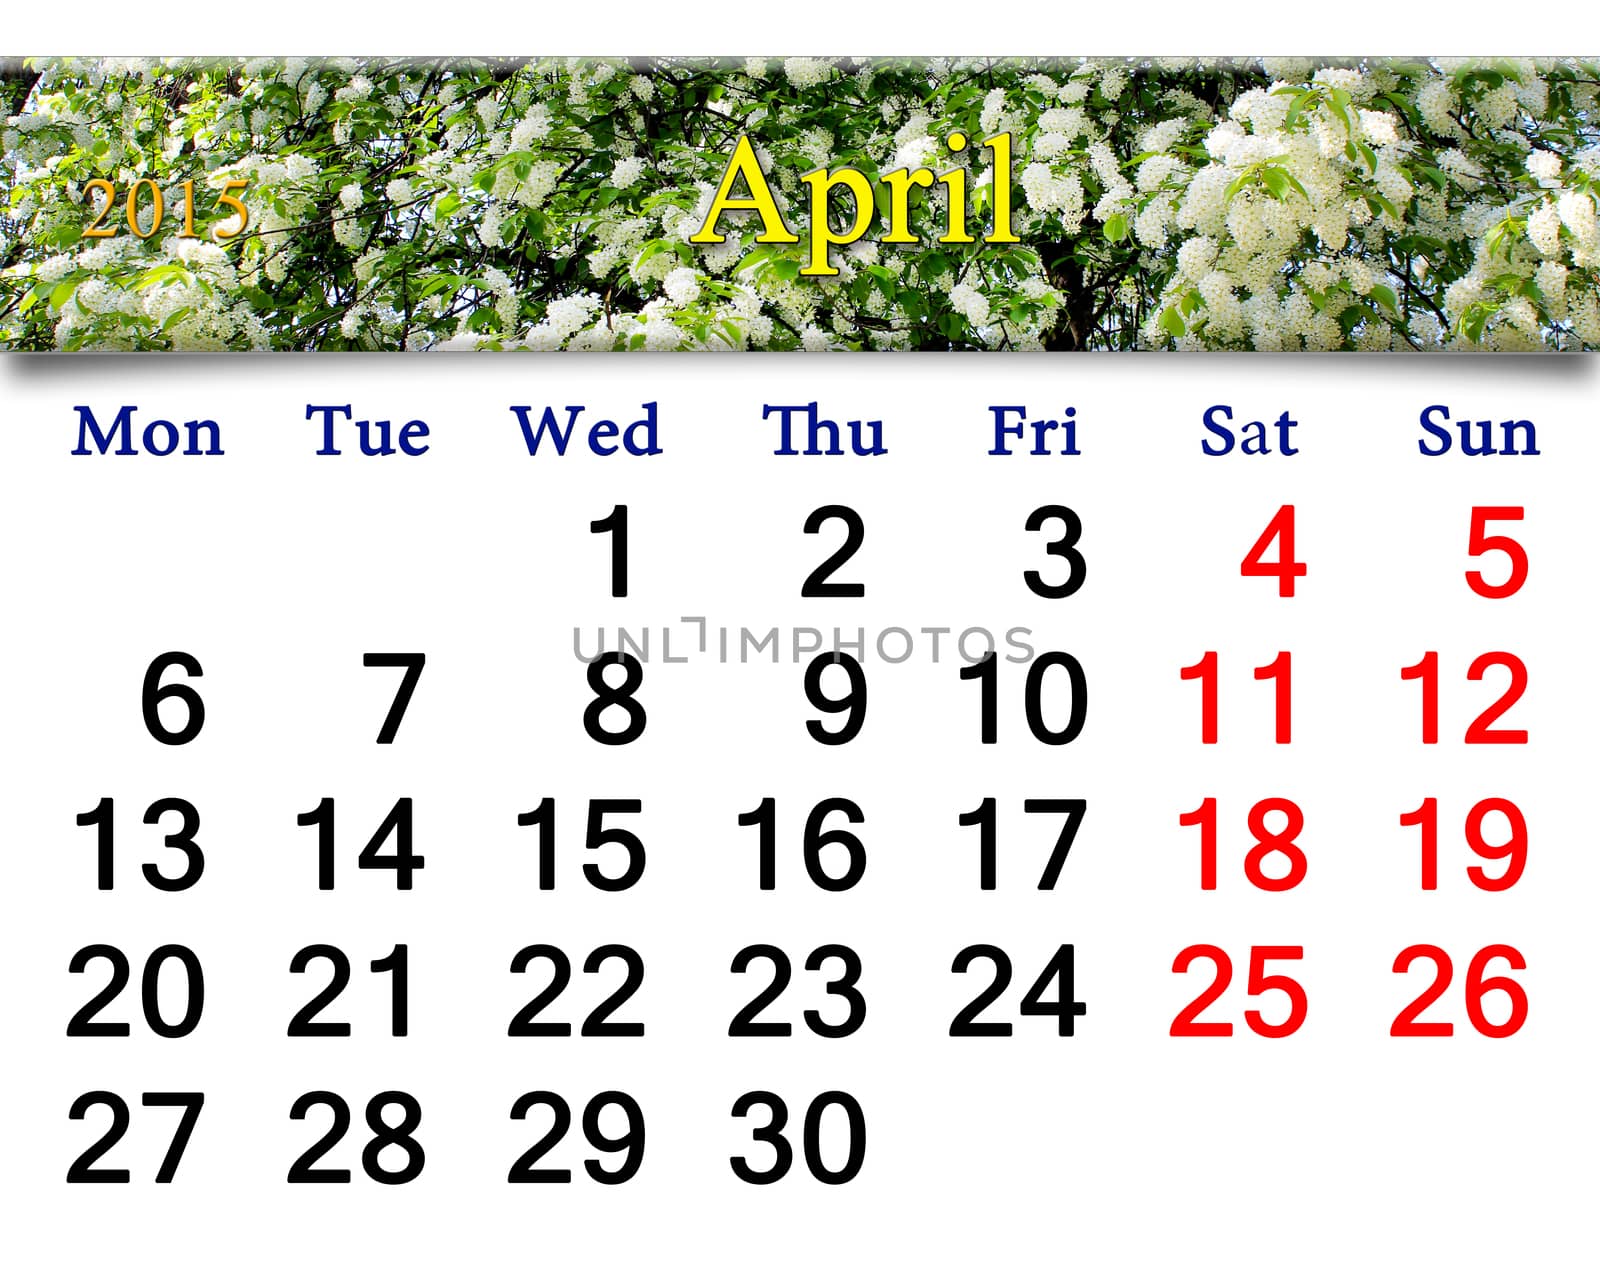 calendar for May of 2015 with bird cherry tree by alexmak